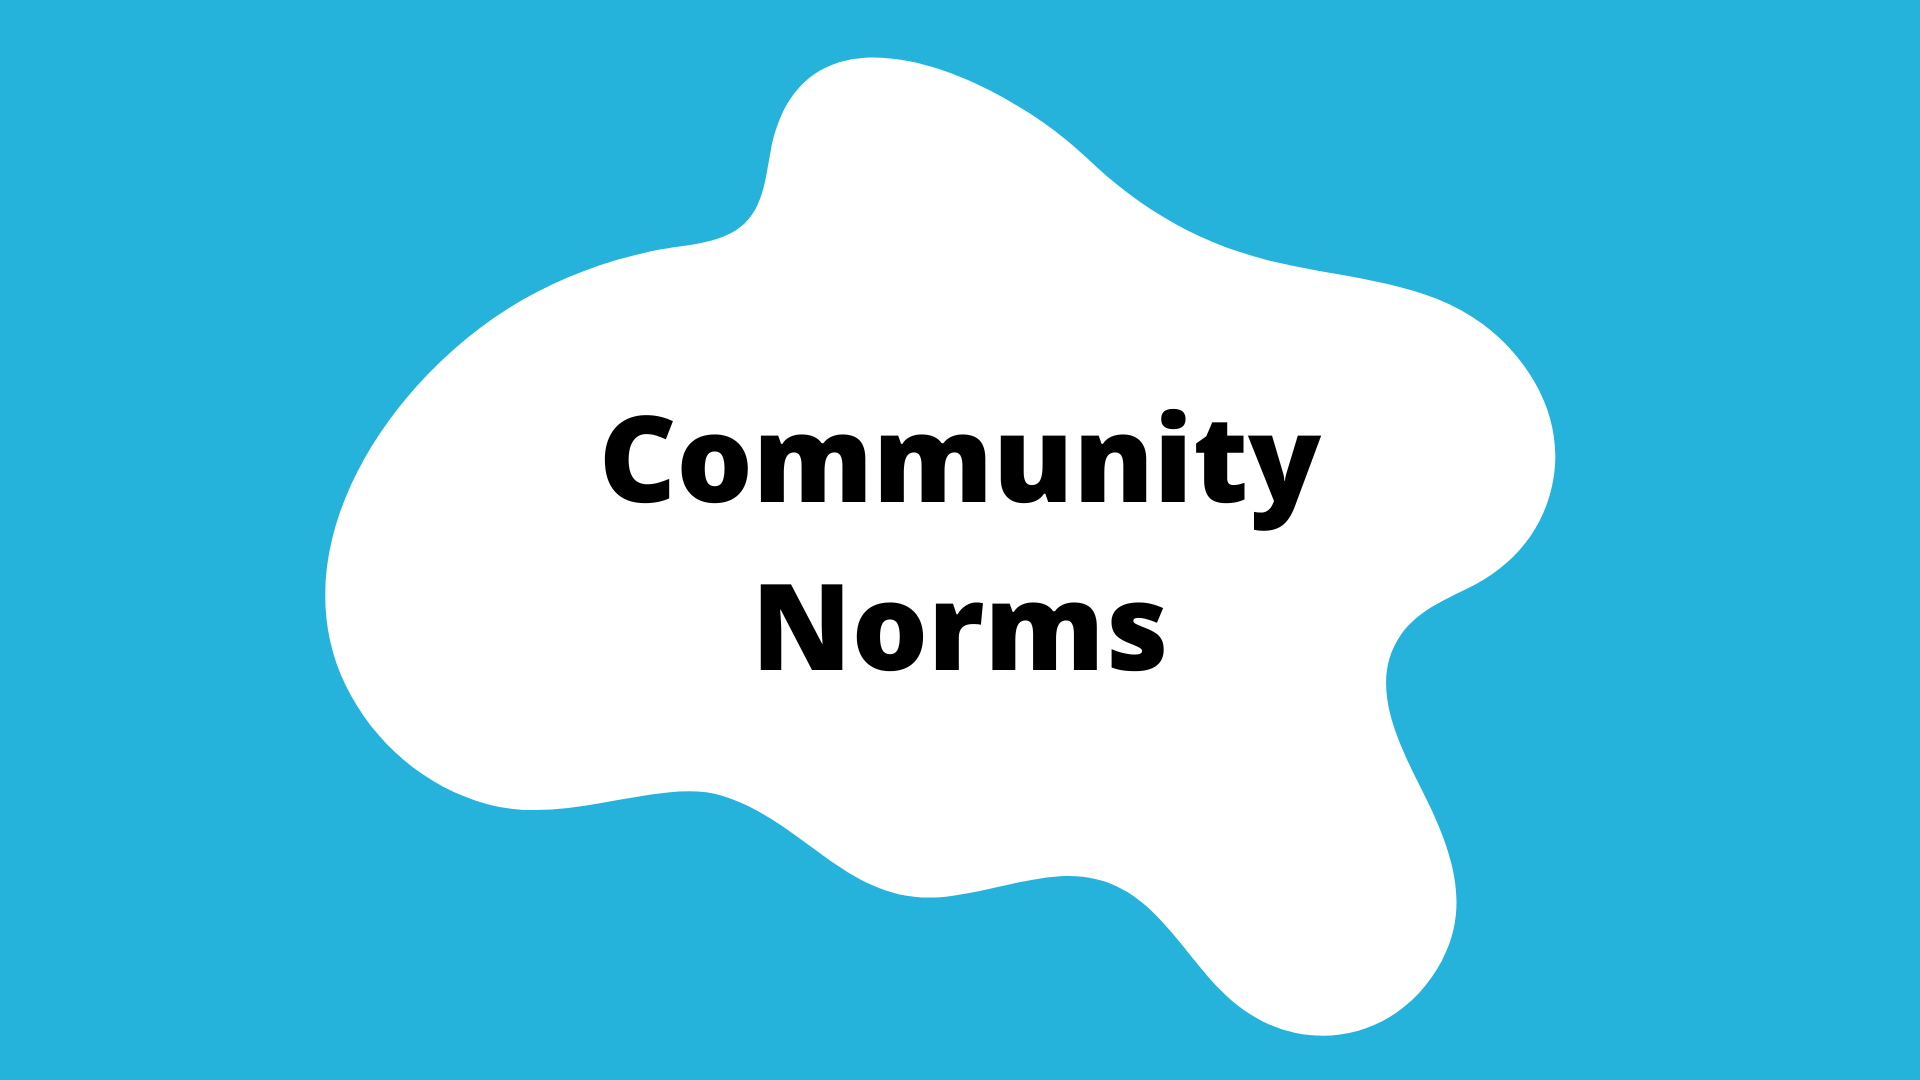 Community Norms